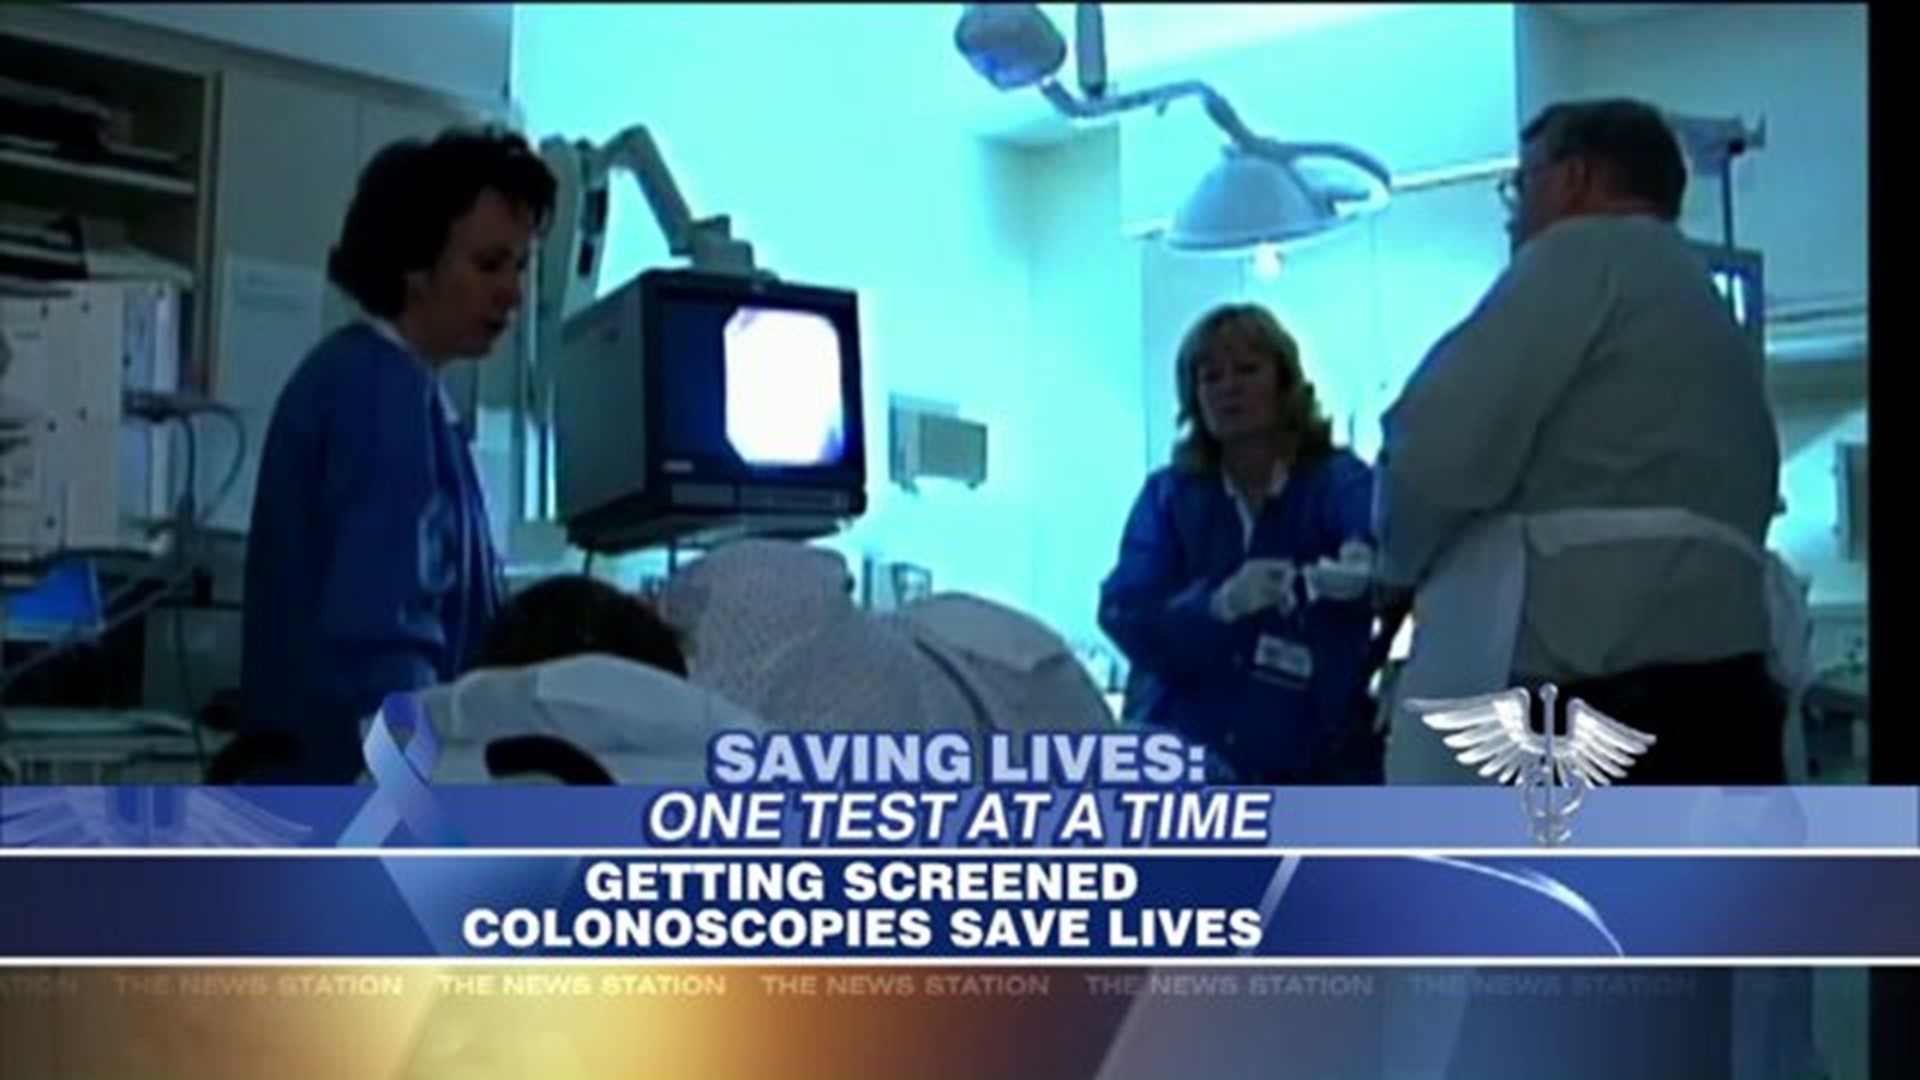 Saving Lives: One Test at a Time